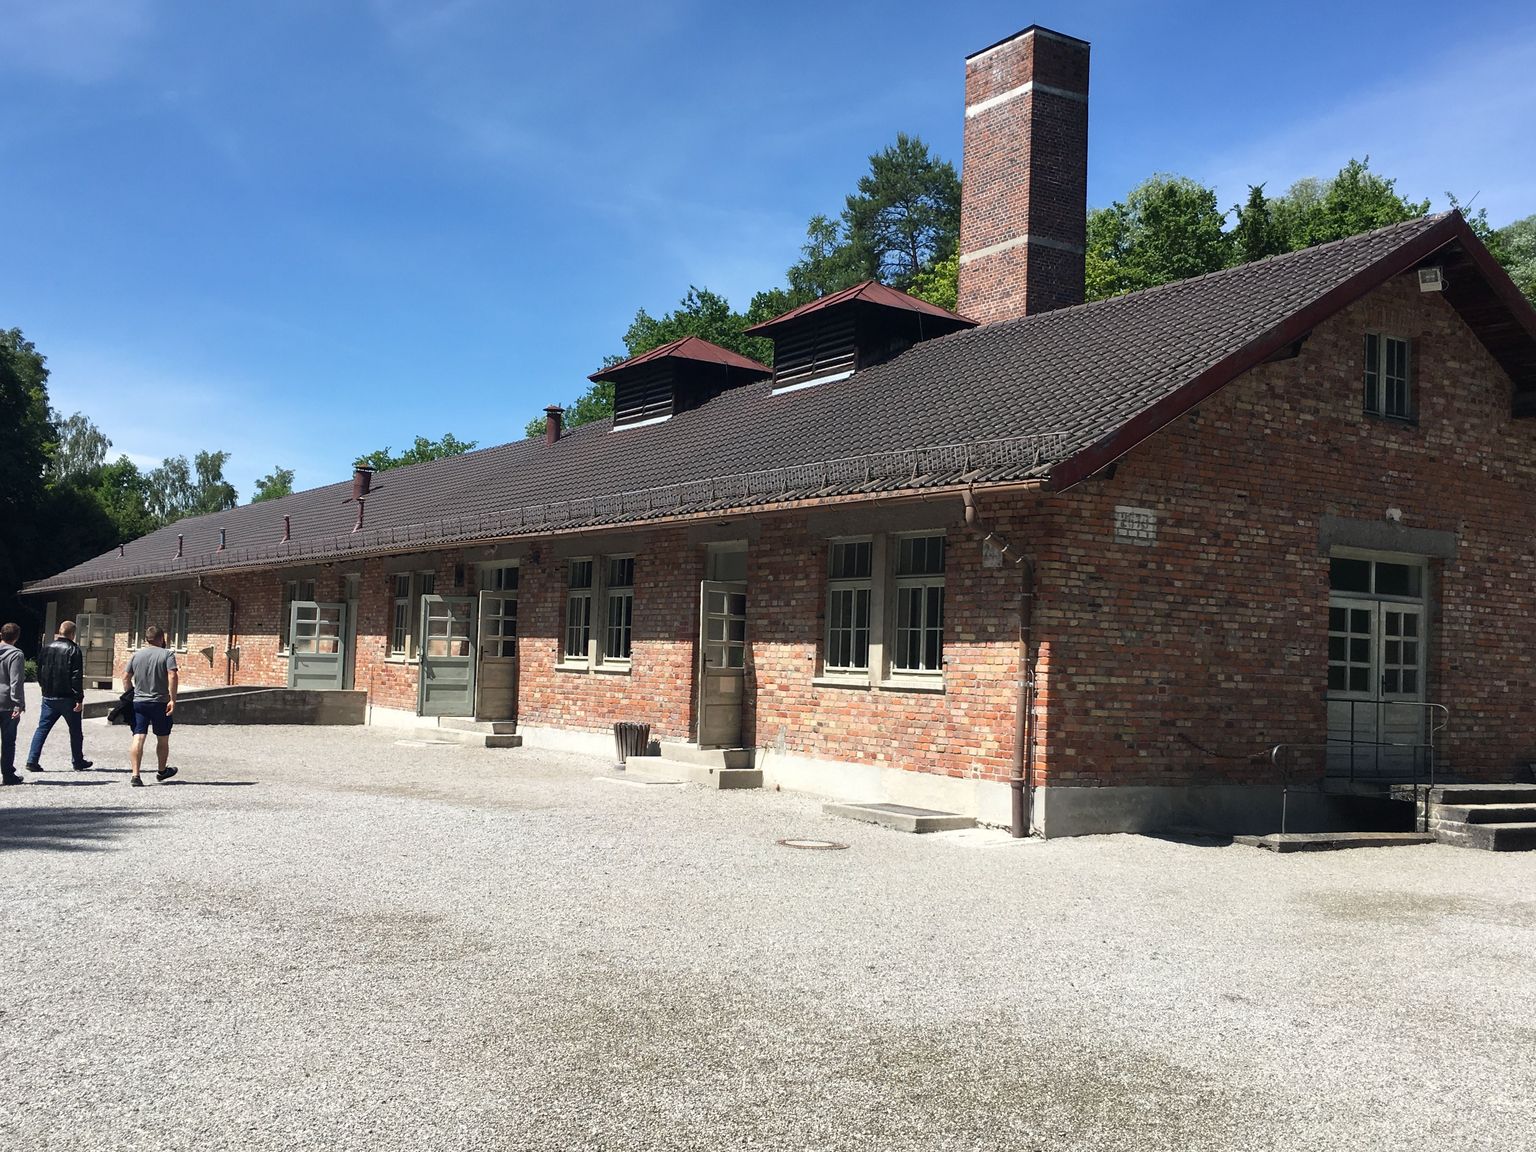 The Gas Chamber and Crematorium at Dachau Concentration Camp